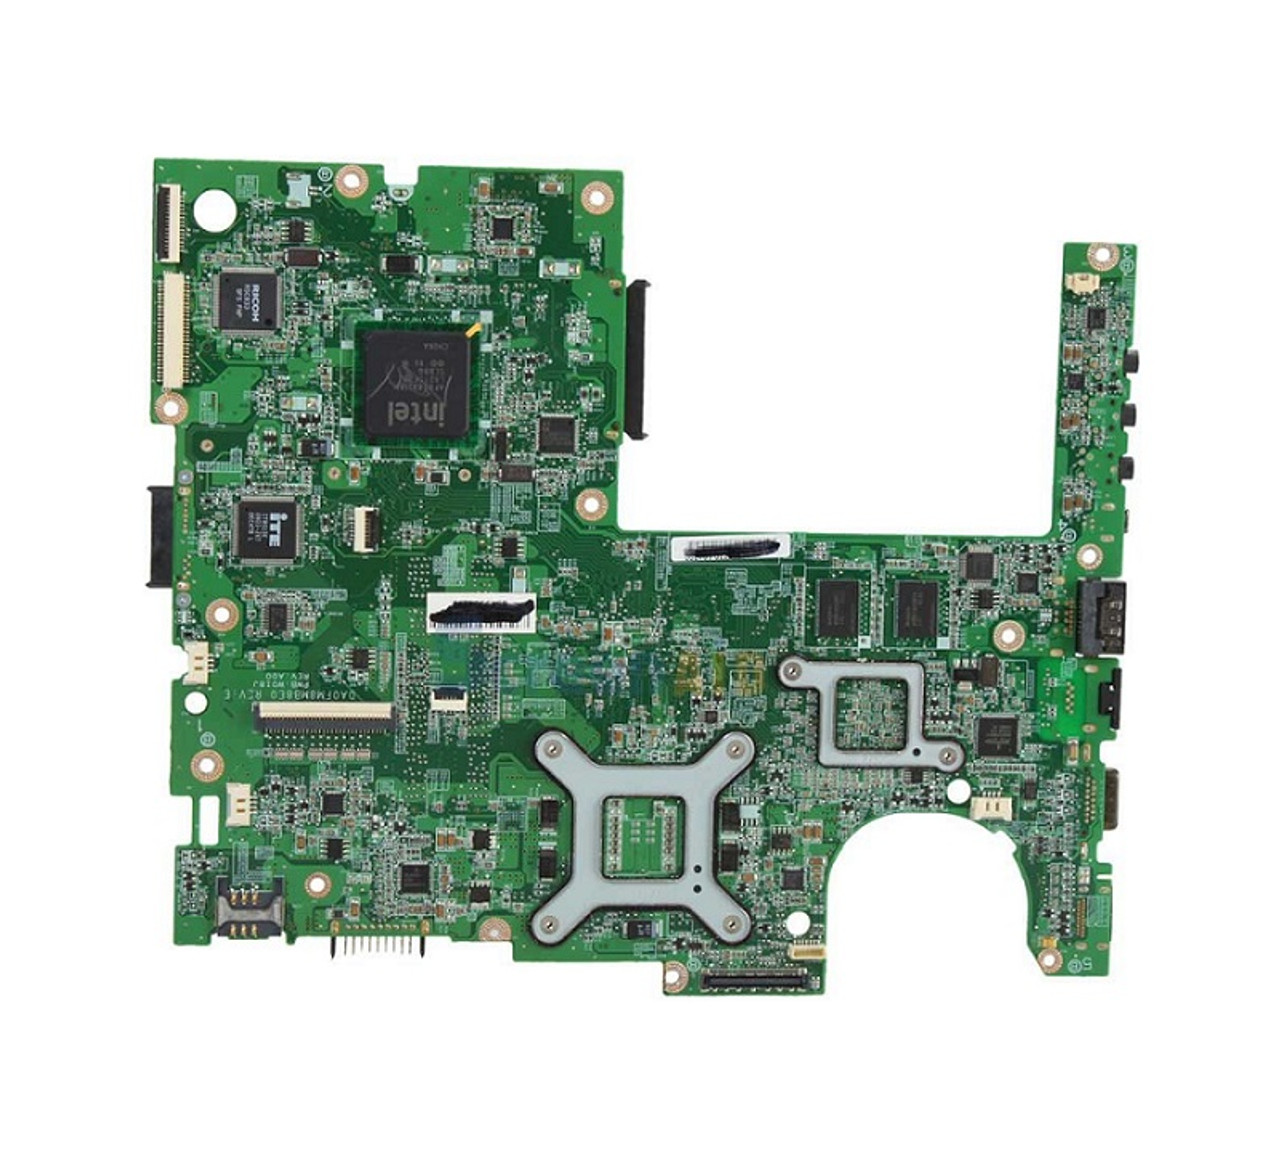 608955-001 - HP System Board for Mini 210-1100 Notebook Motheboard with N455 1.66GHz Cpu (Refurbished)